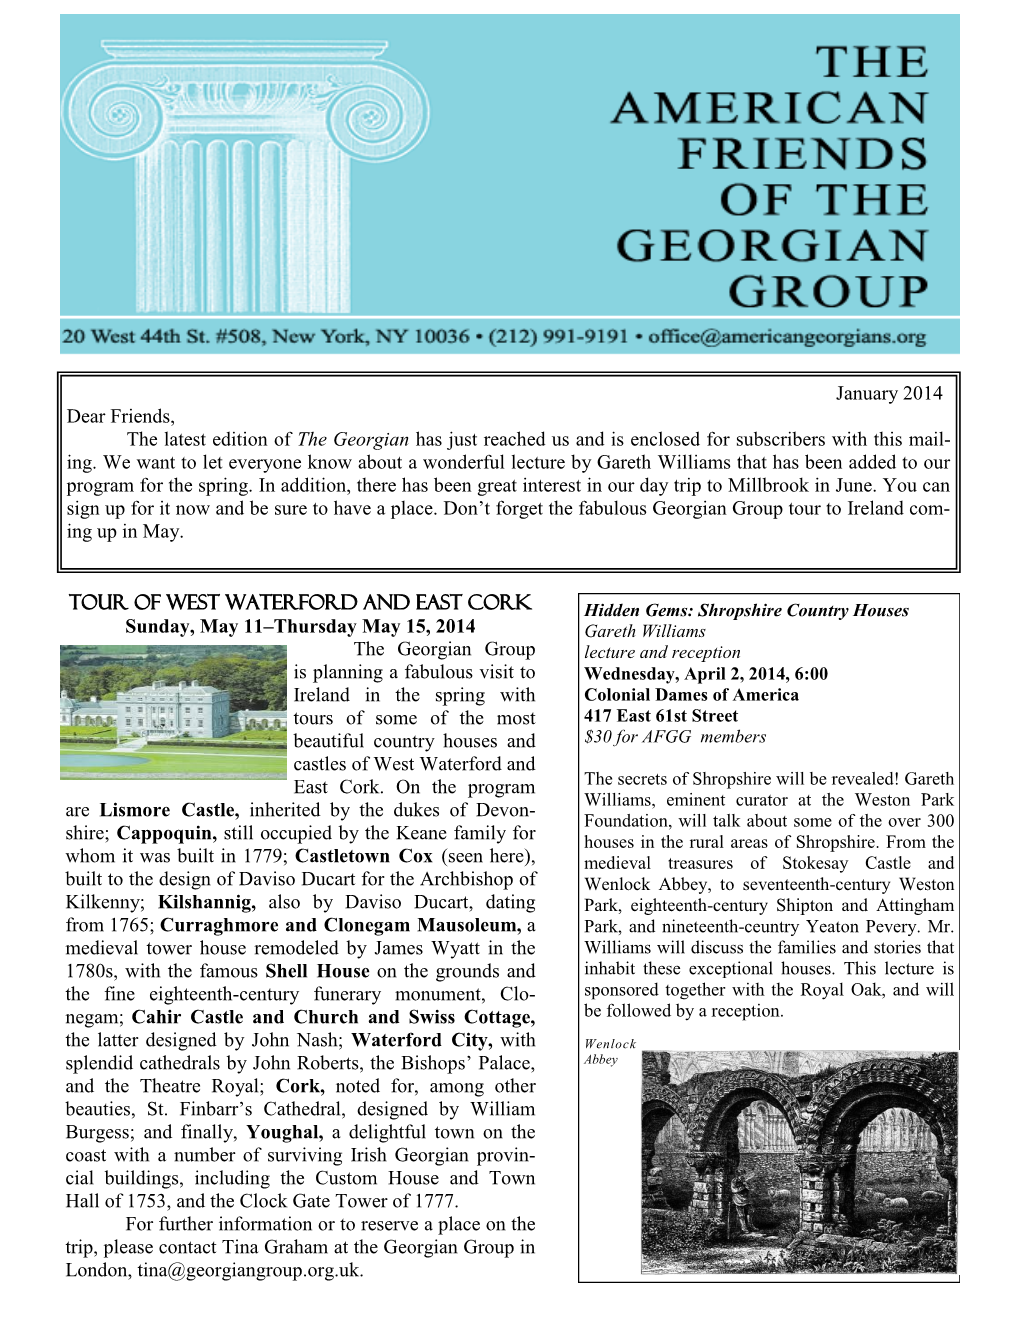 January 2014 Dear Friends, the Latest Edition of the Georgian Has Just Reached Us and Is Enclosed for Subscribers with This Mail- Ing